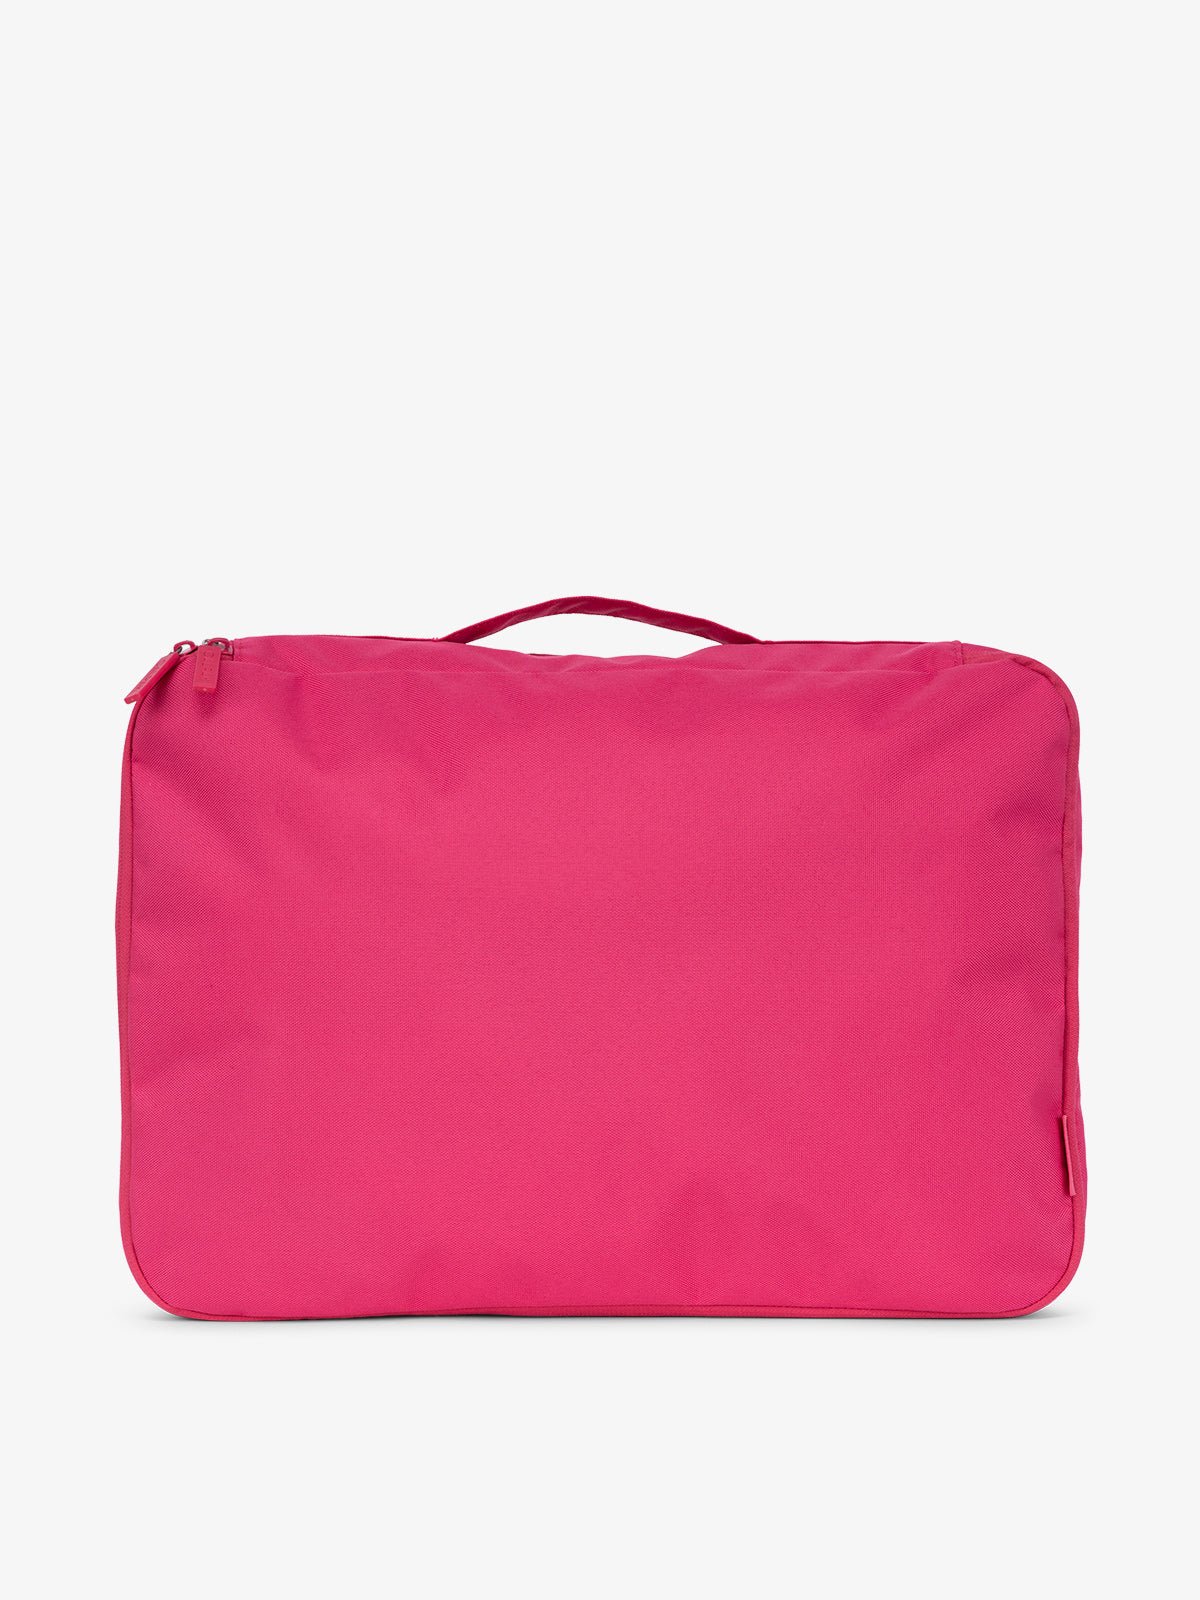 CALPAK large packing cubes with top handle in pink